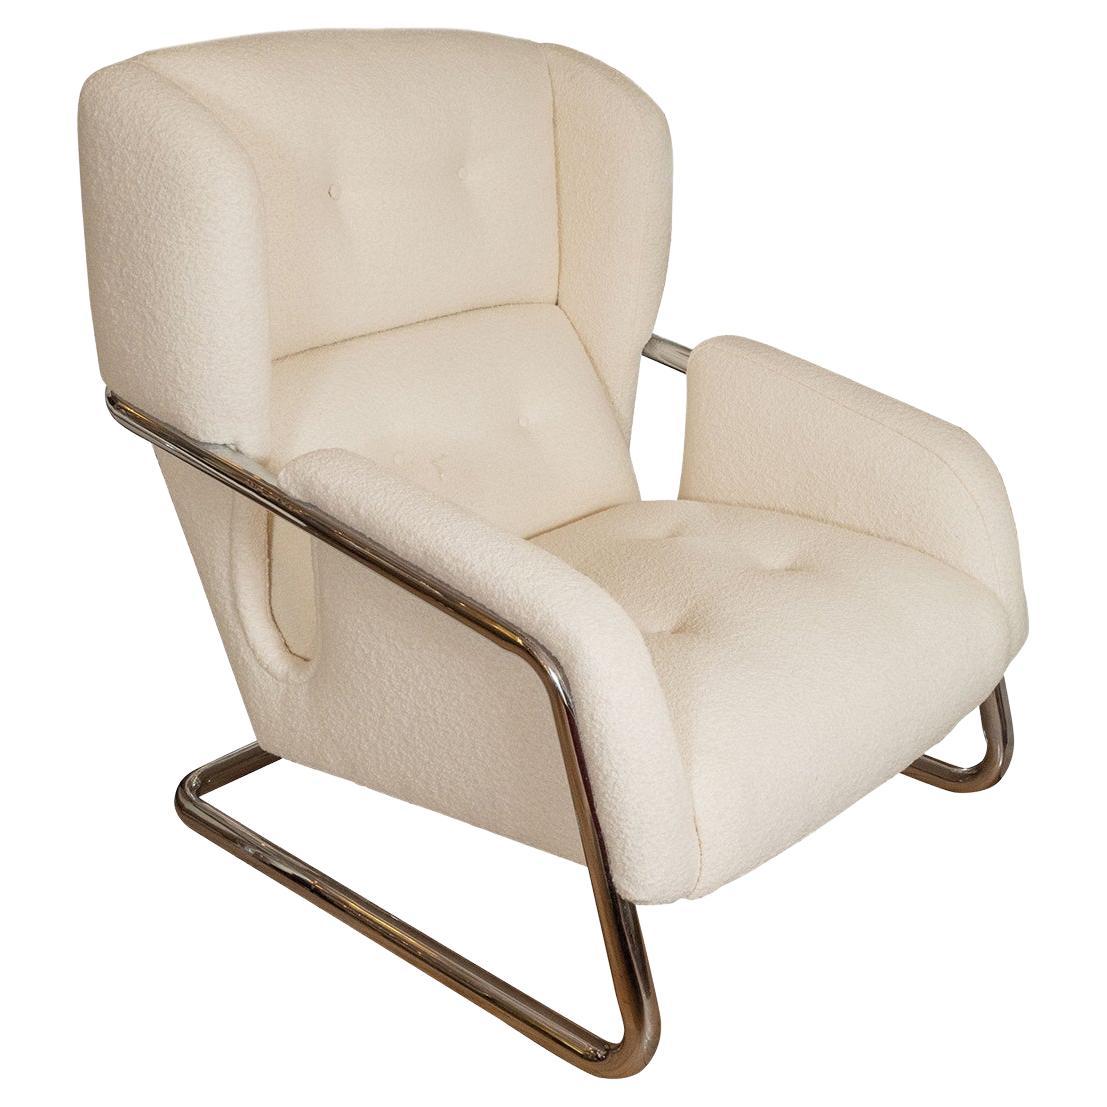 Pair of Tubular Metal Upholstered Armchairs For Sale